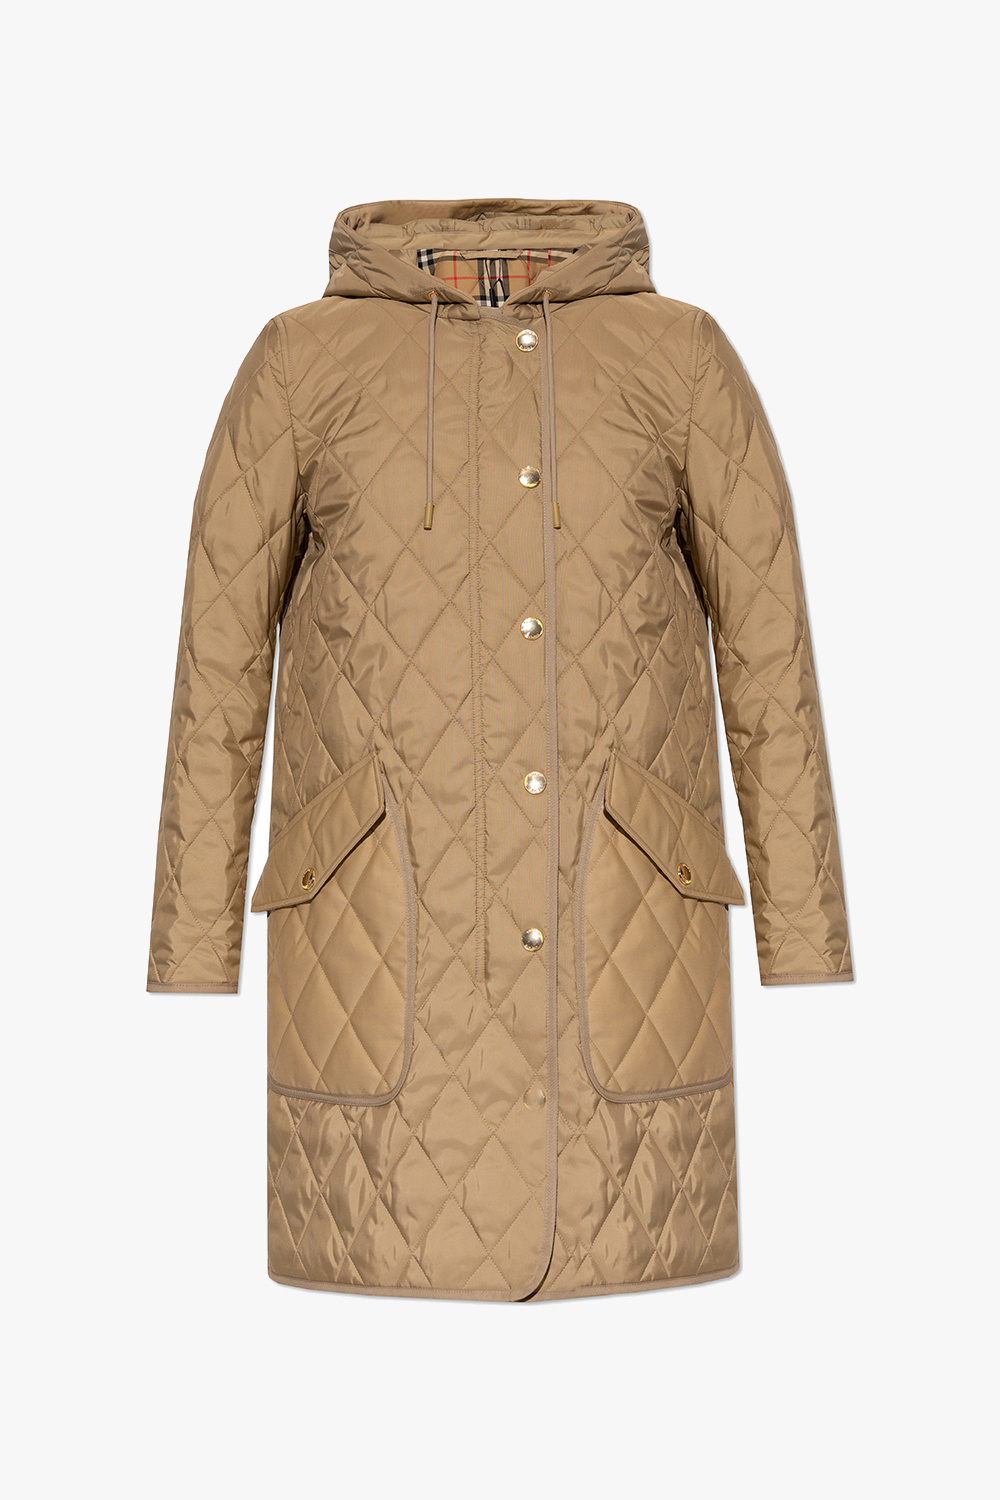 Diamond Quilted Nylon Cropped Jacket in Archive Beige - Women